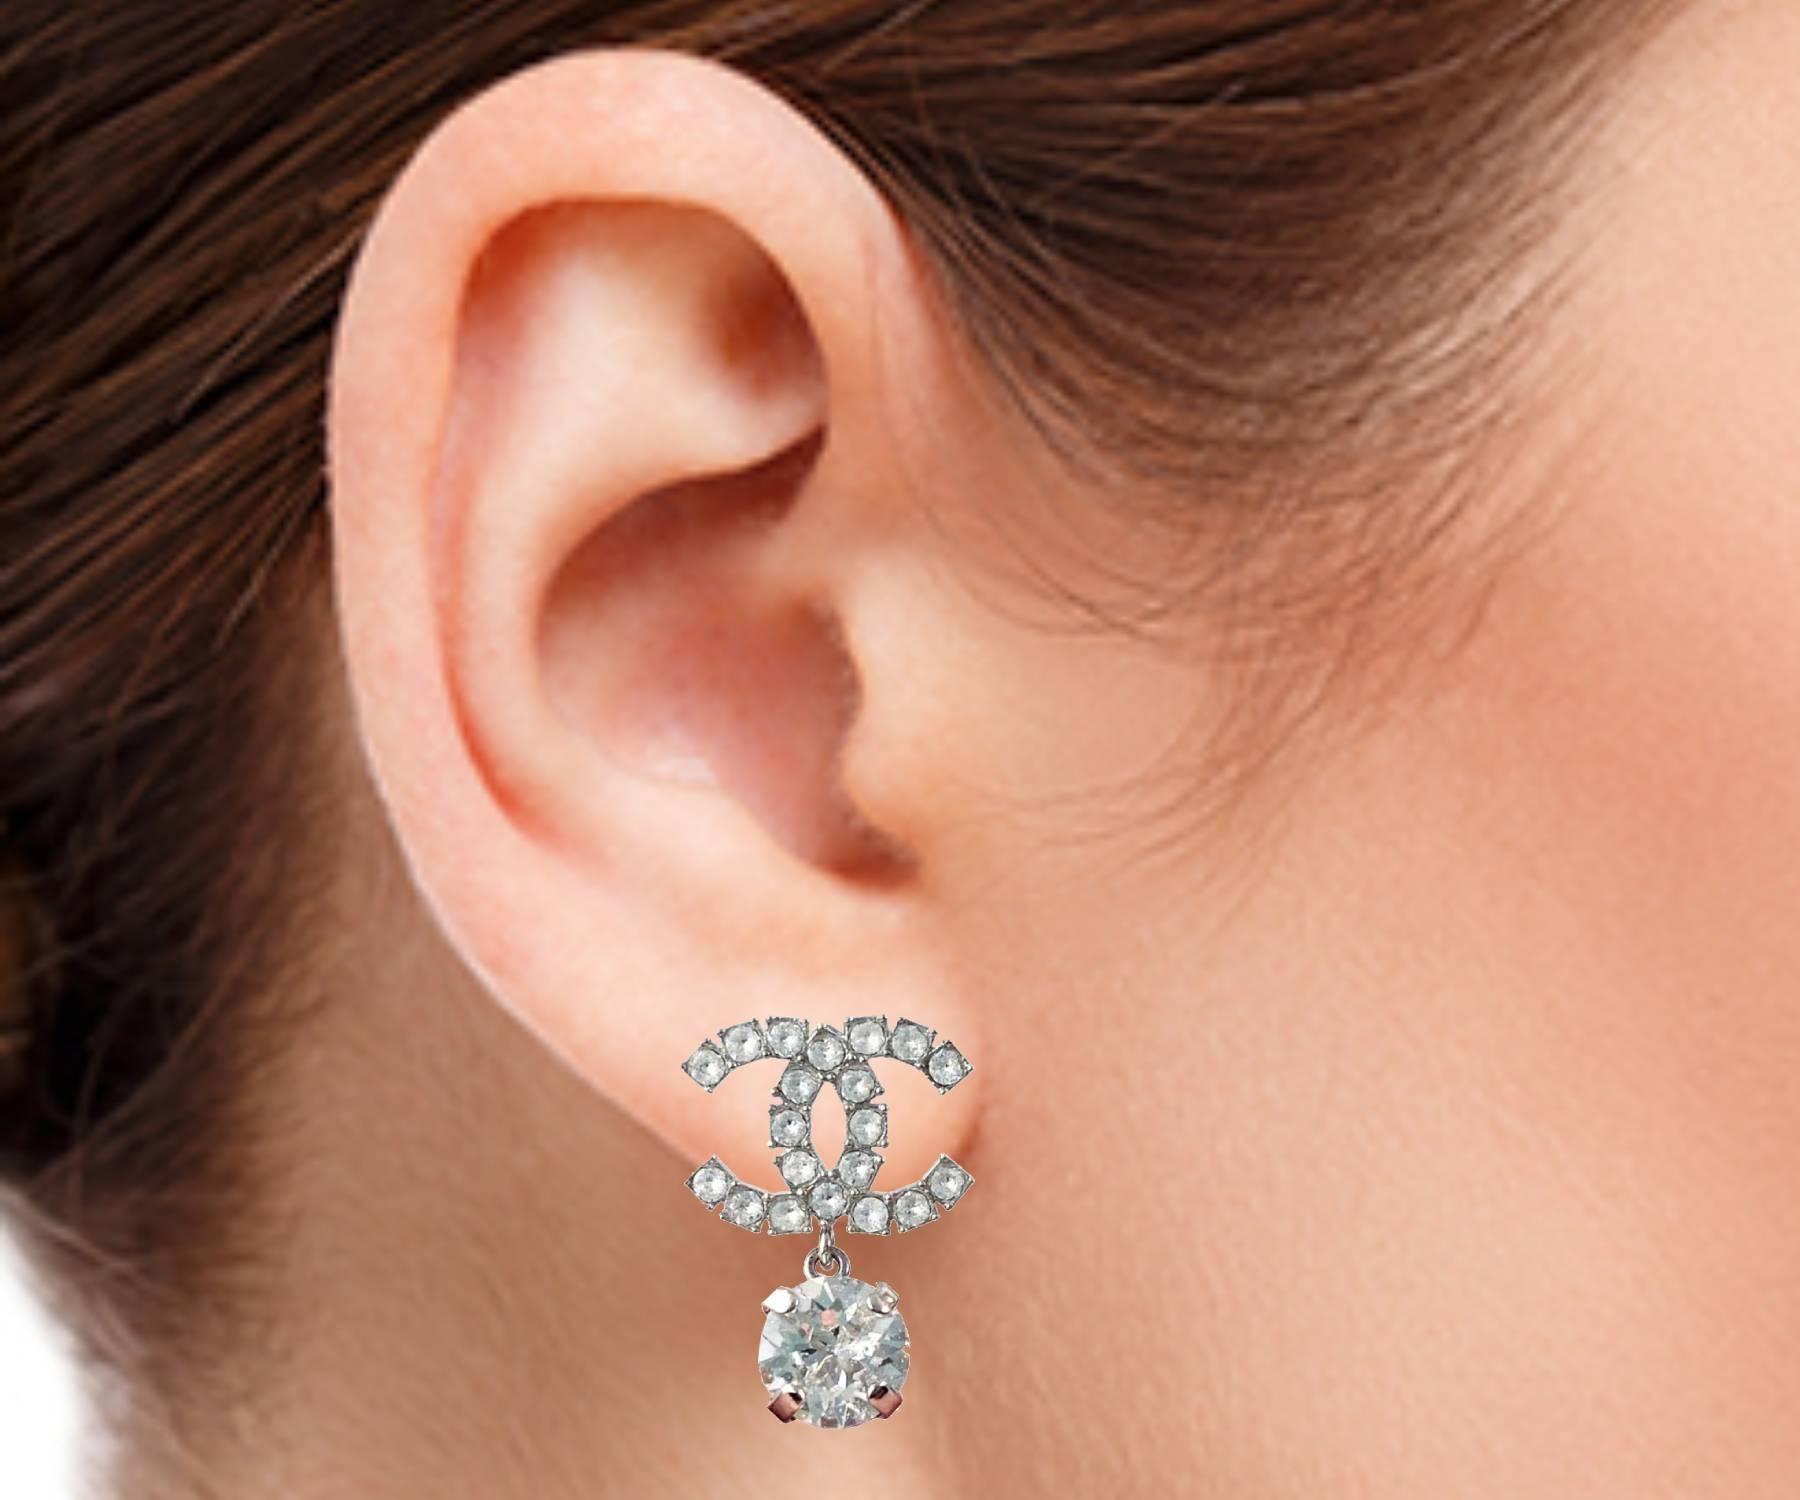 Chanel Silver CC Rocky Cracked Crystal Reissued Piercing Earrings In Good Condition For Sale In Pasadena, CA